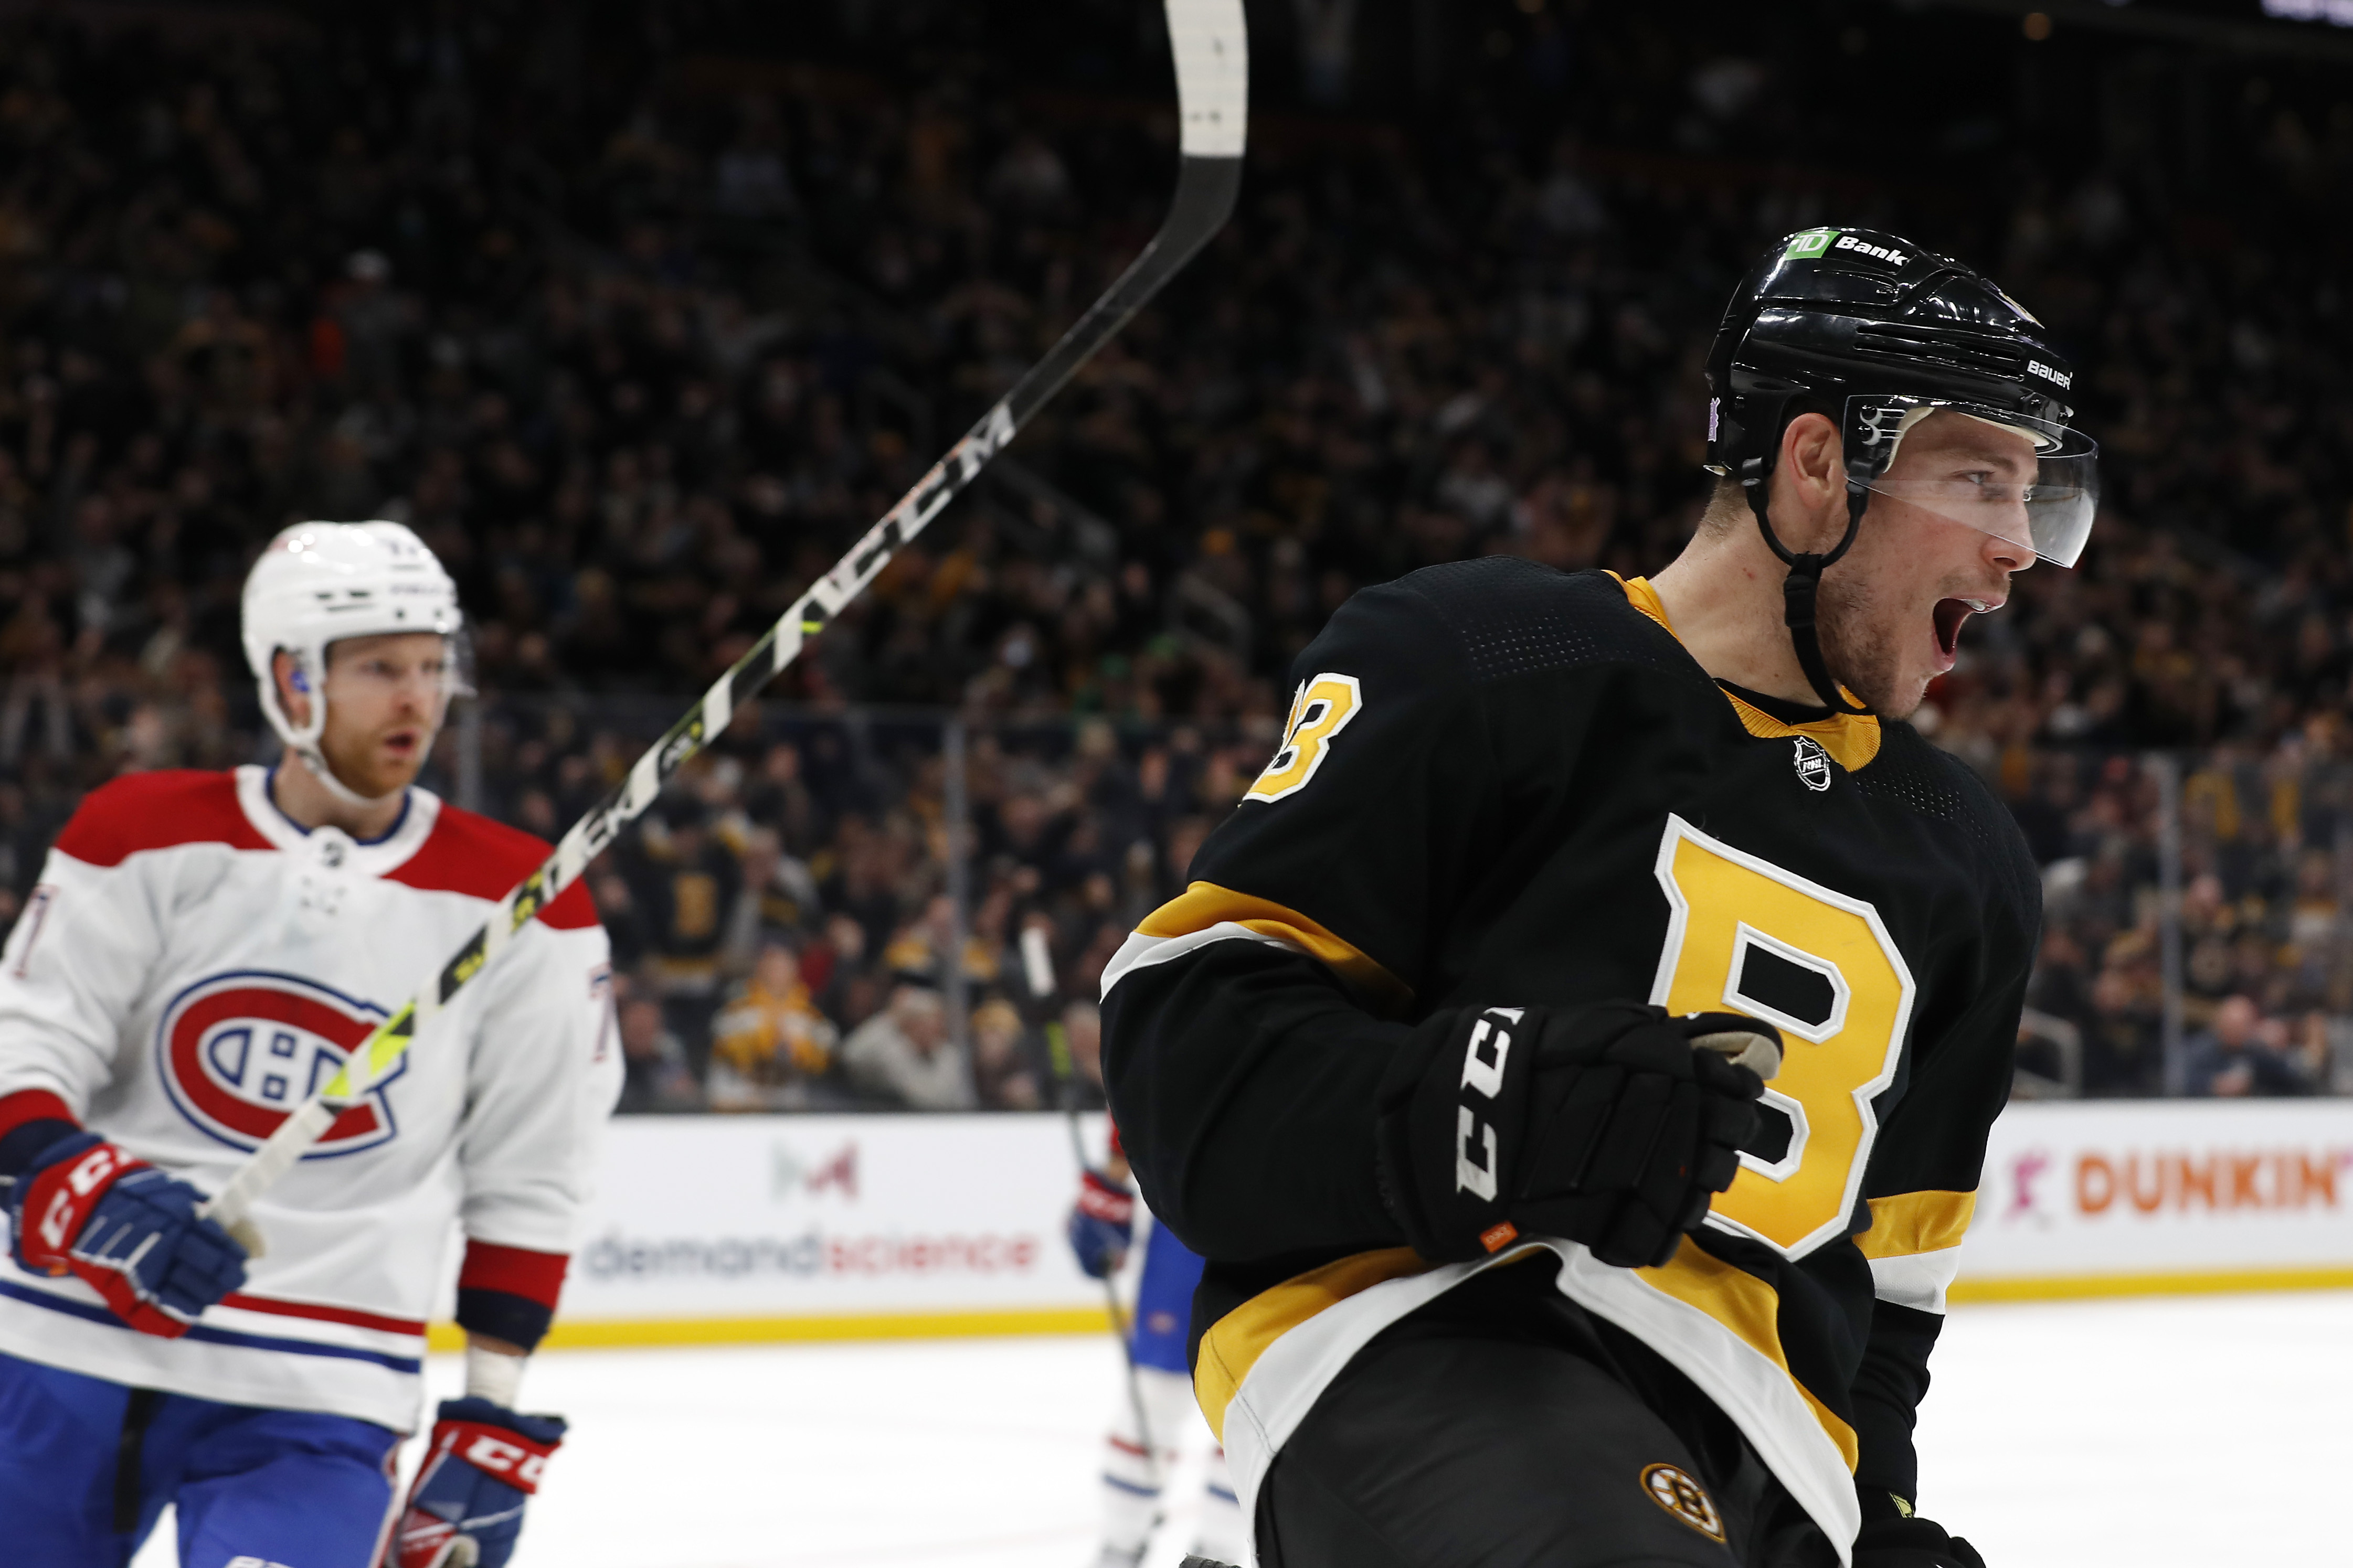 Charlie Coyle remains team-changing presence for Bruins